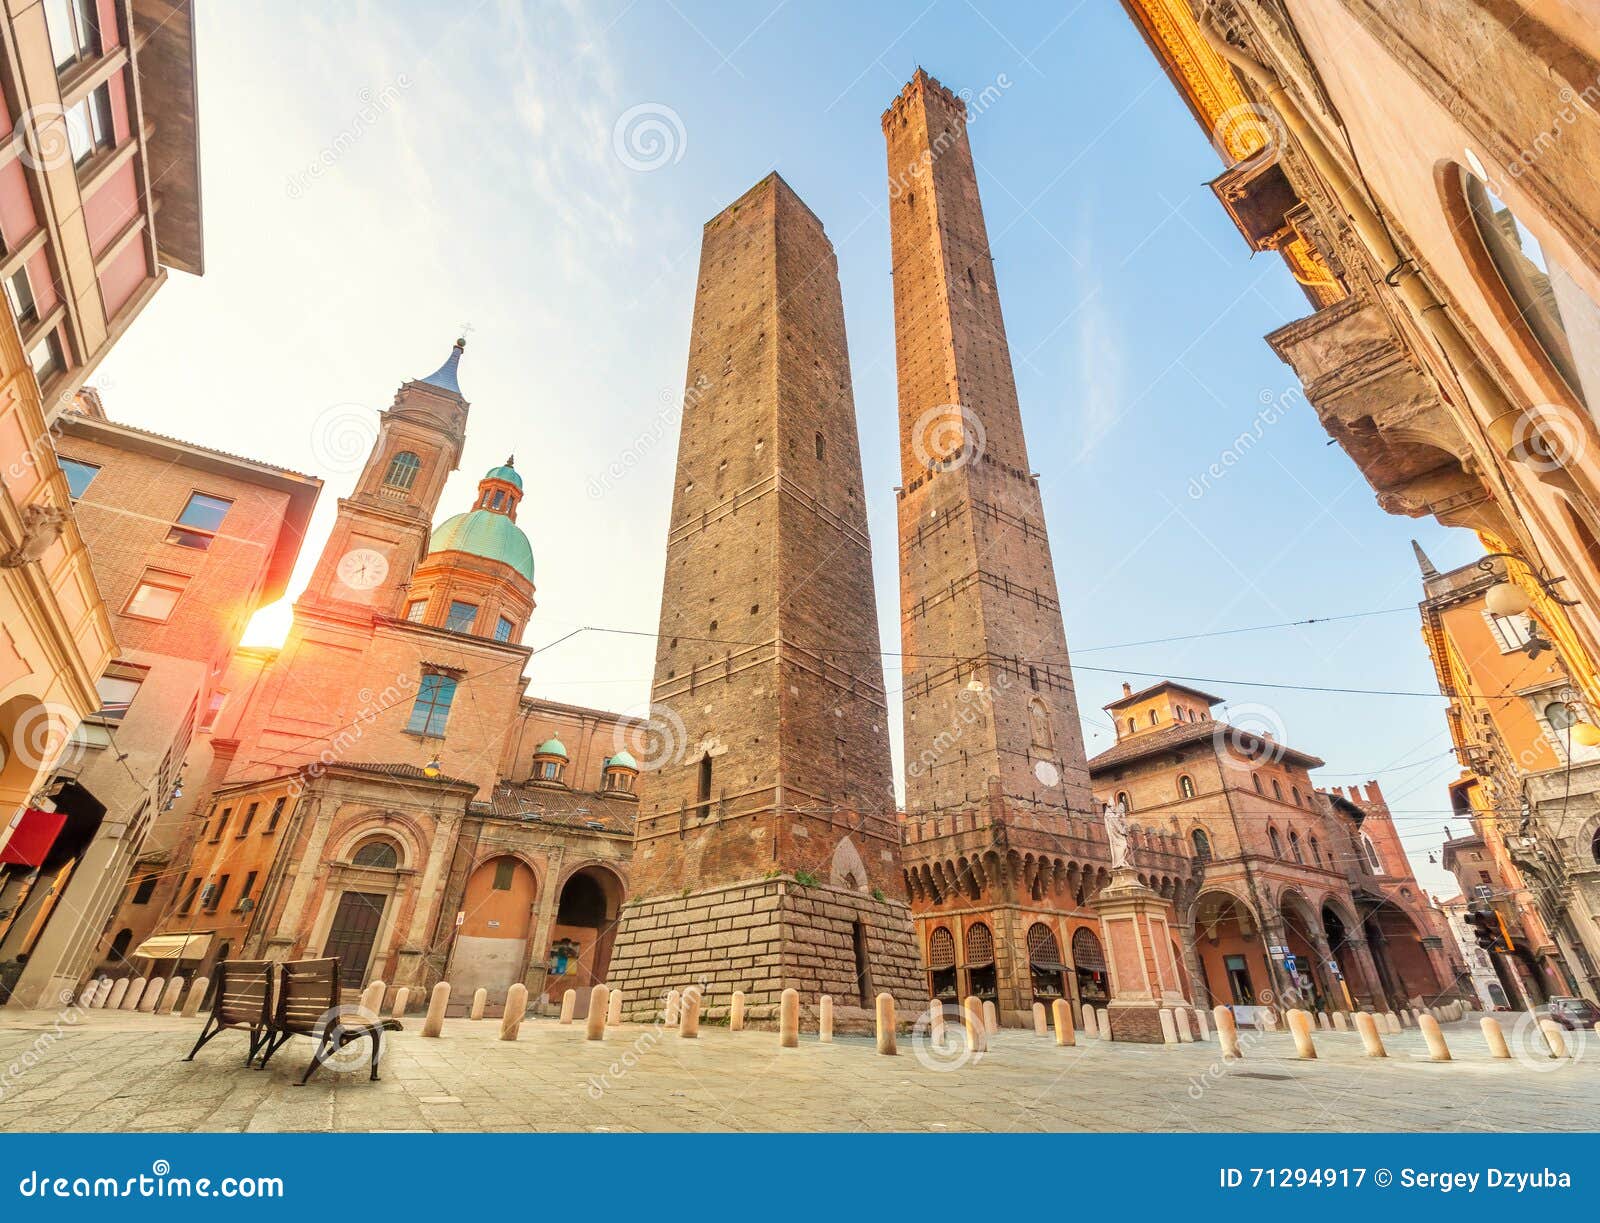 two famous falling towers of bologna